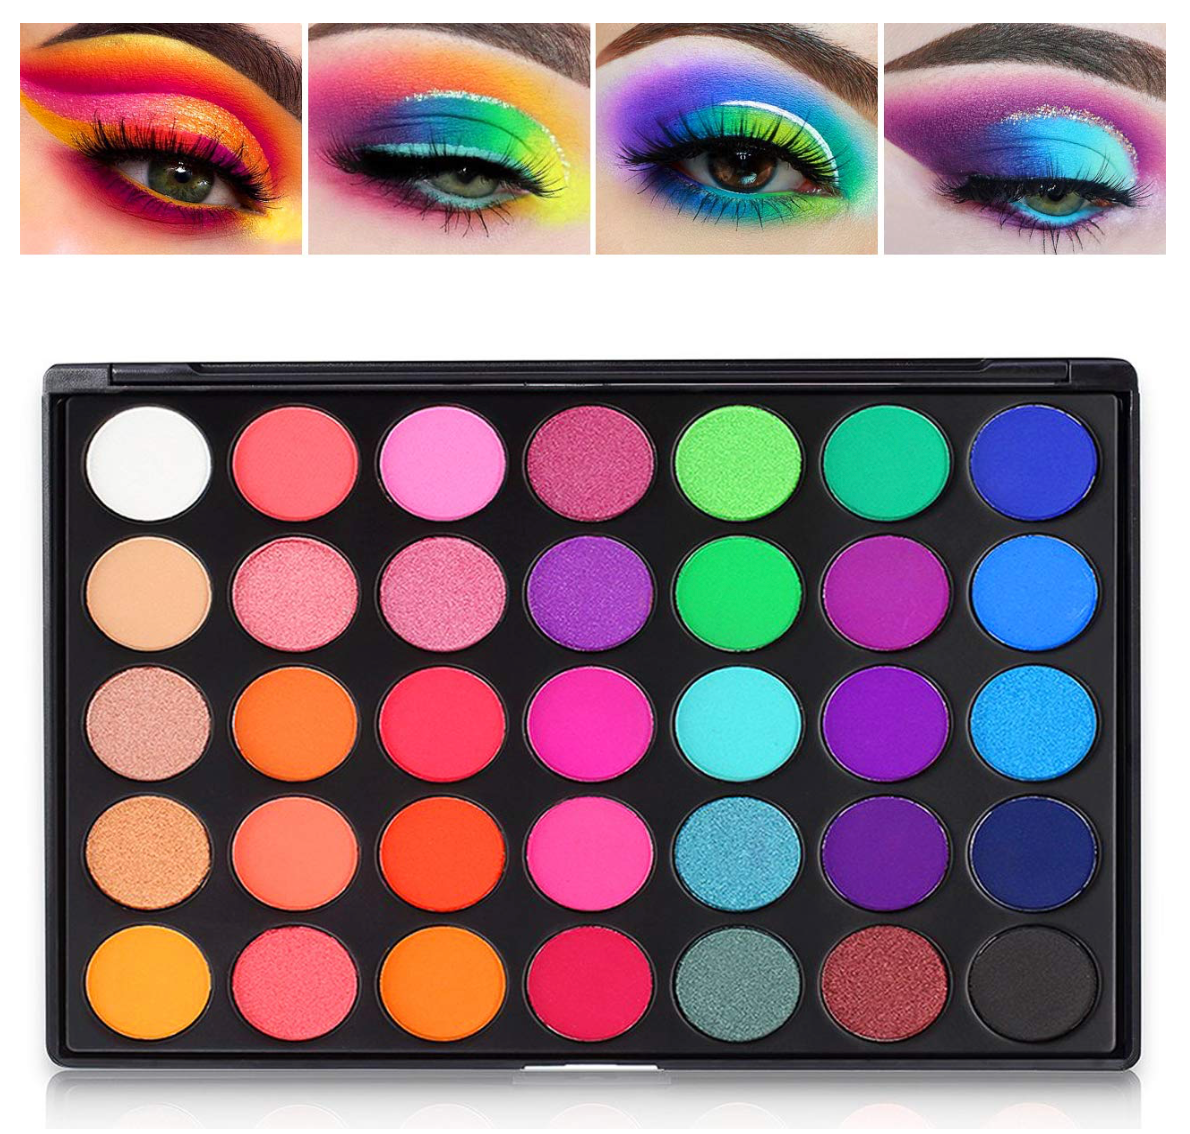 35 Color Eye Shadow Palette - Bright Neons